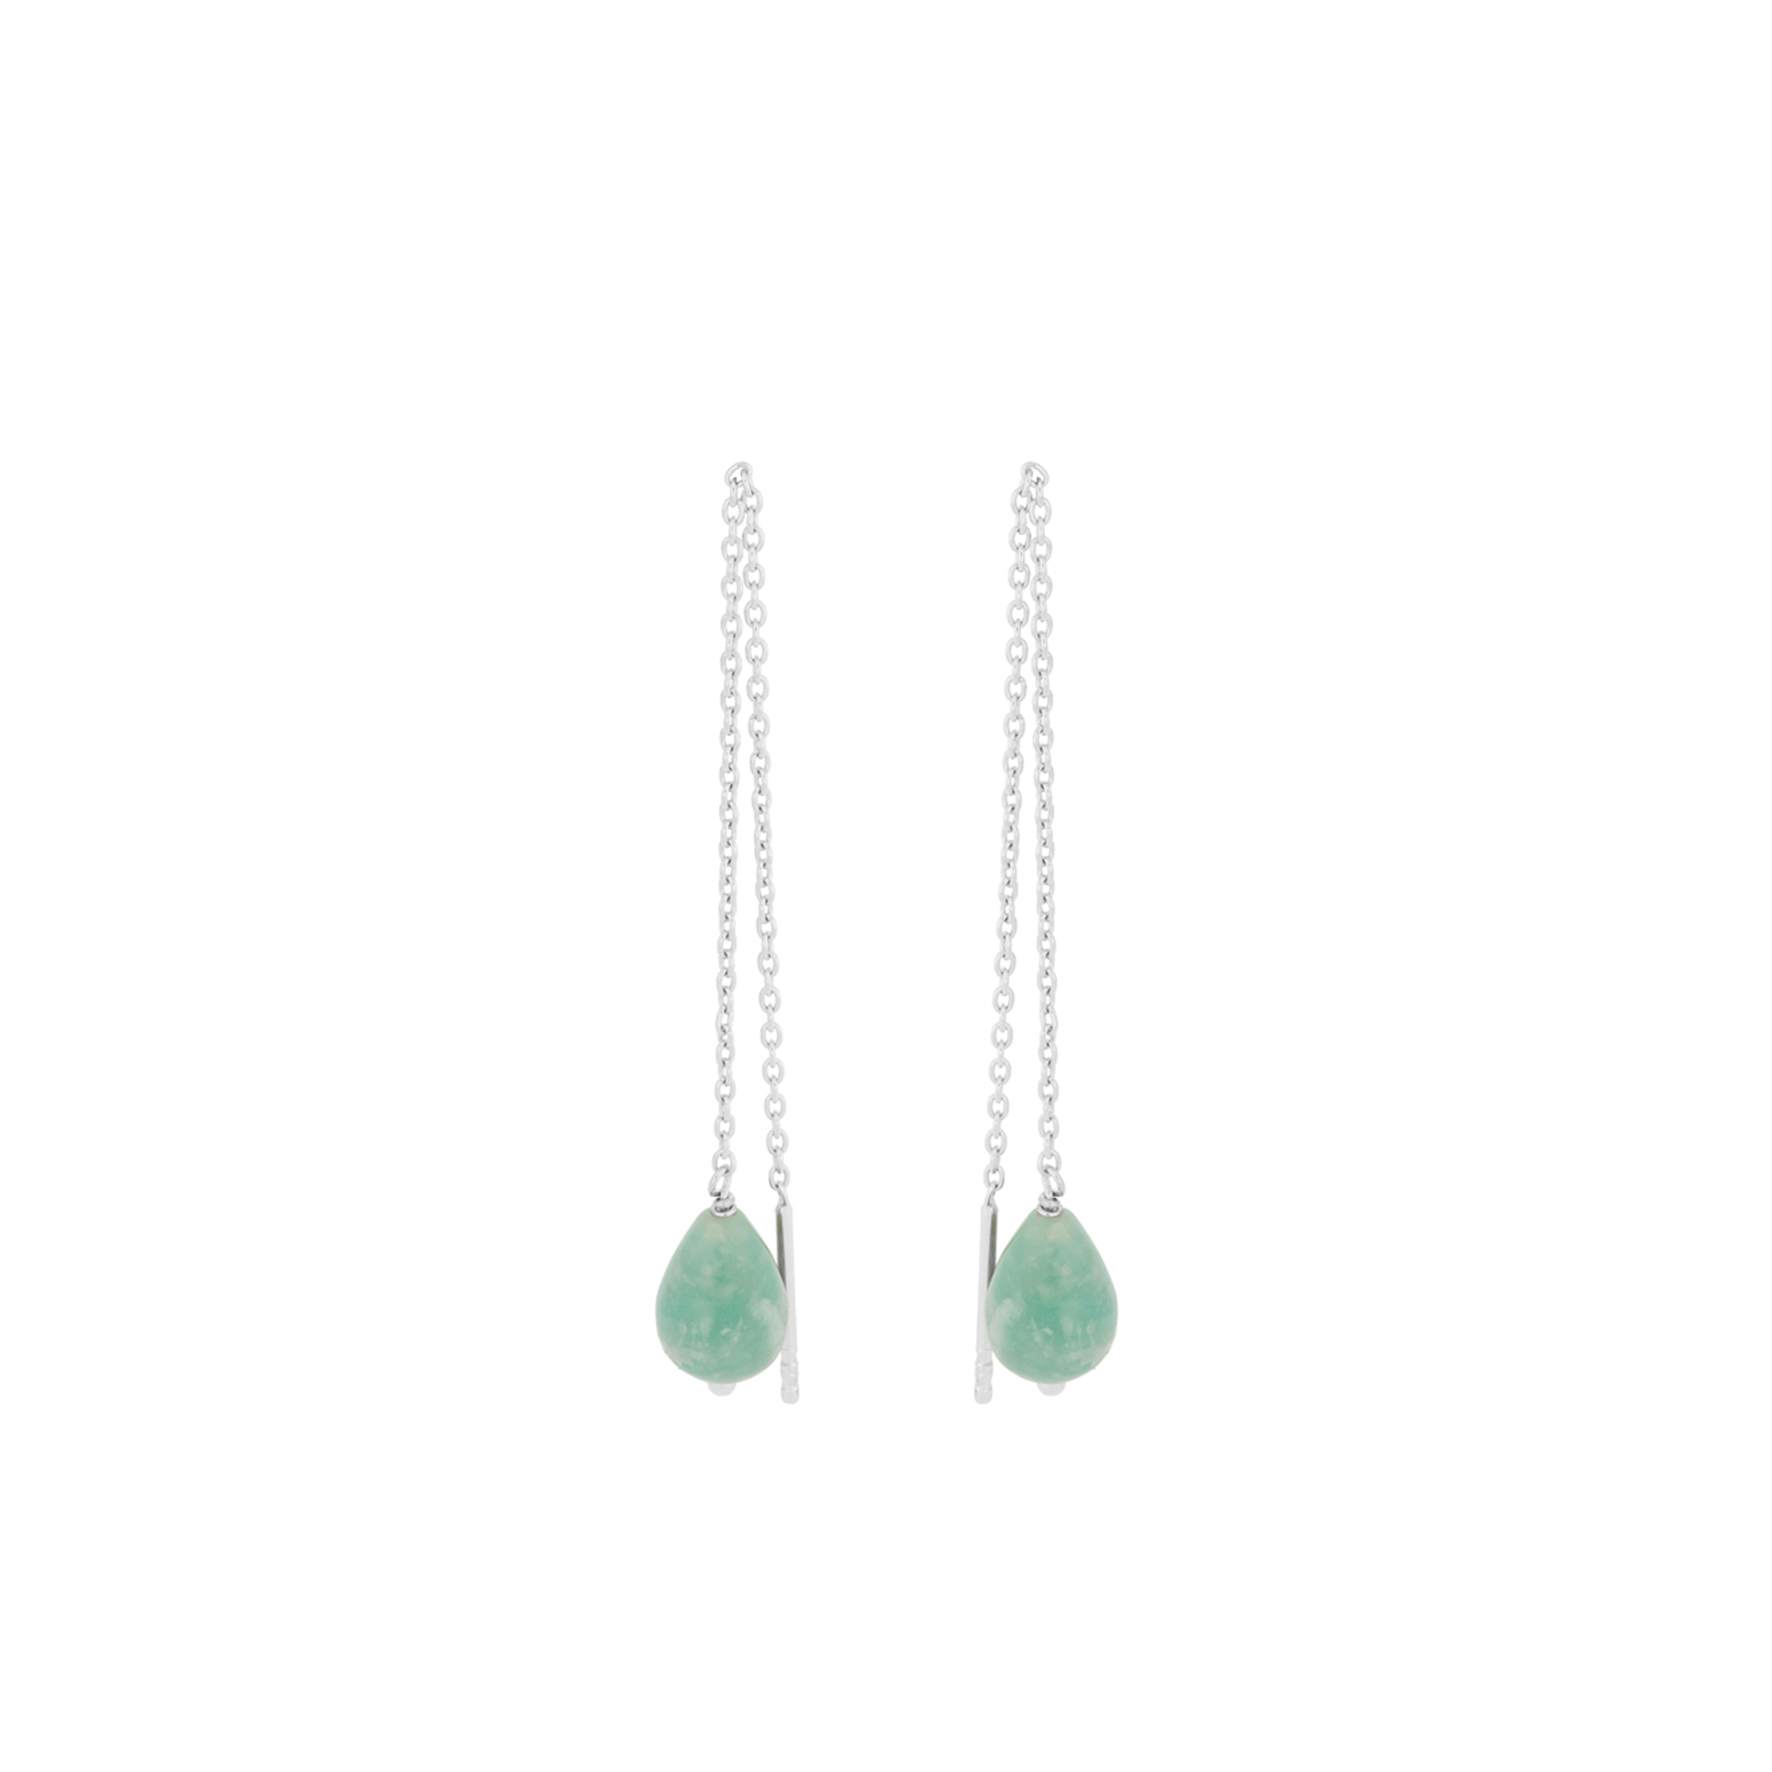 Fjord Earchains from Pernille Corydon in Silver Sterling 925|Amazonite